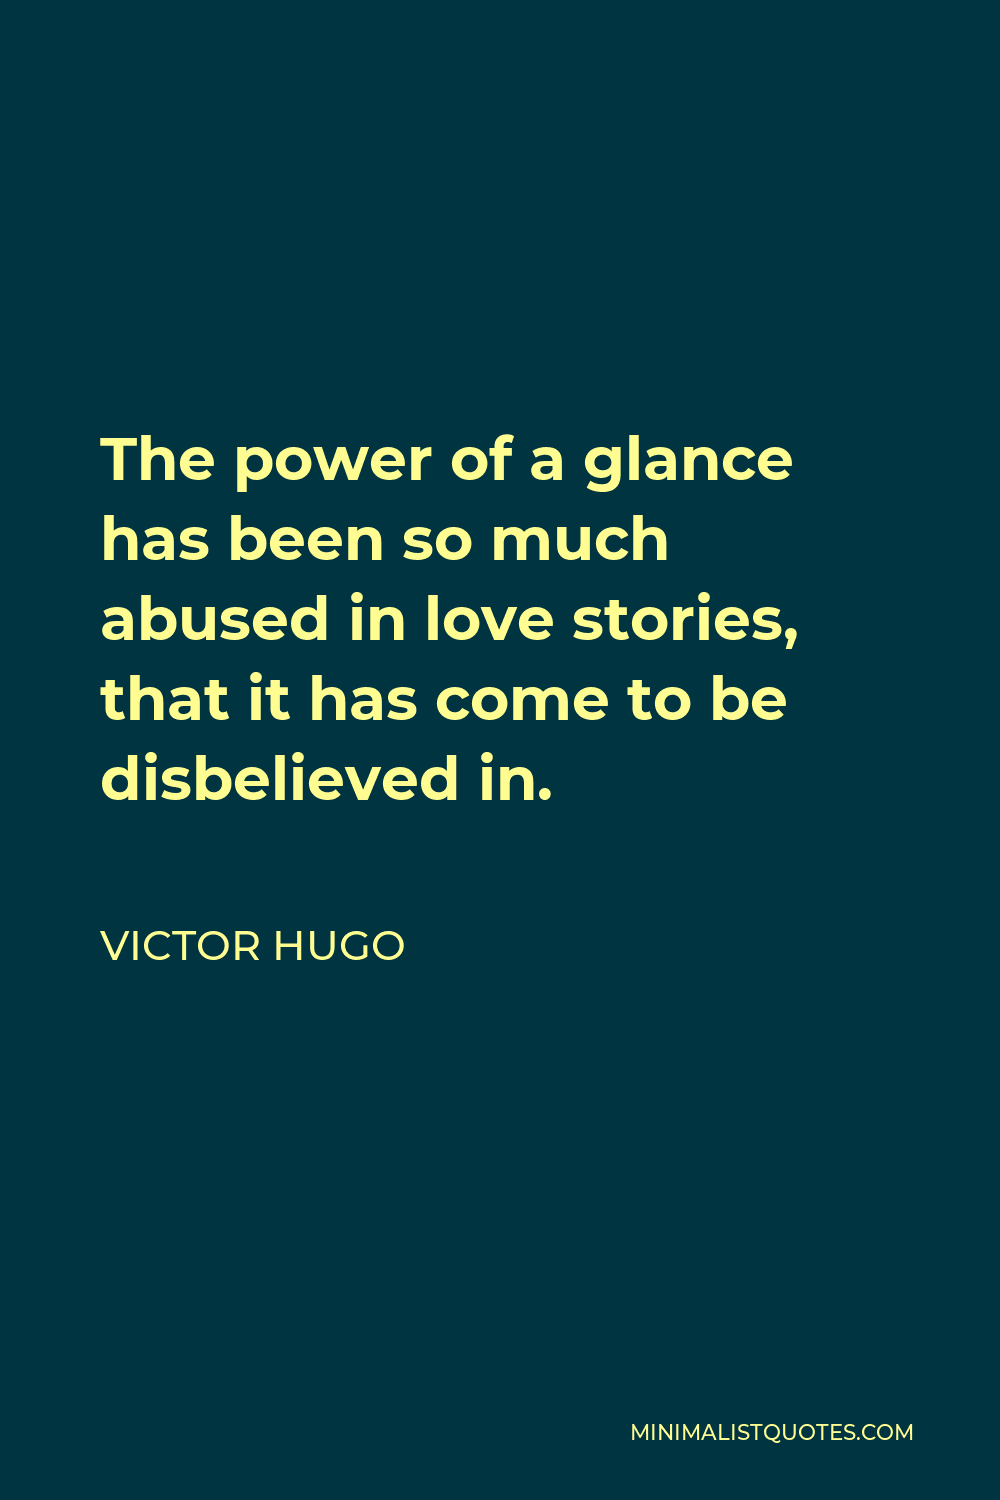 Victor Hugo Quote - The power of a glance has been so much abused in love stories, that it has come to be disbelieved in.